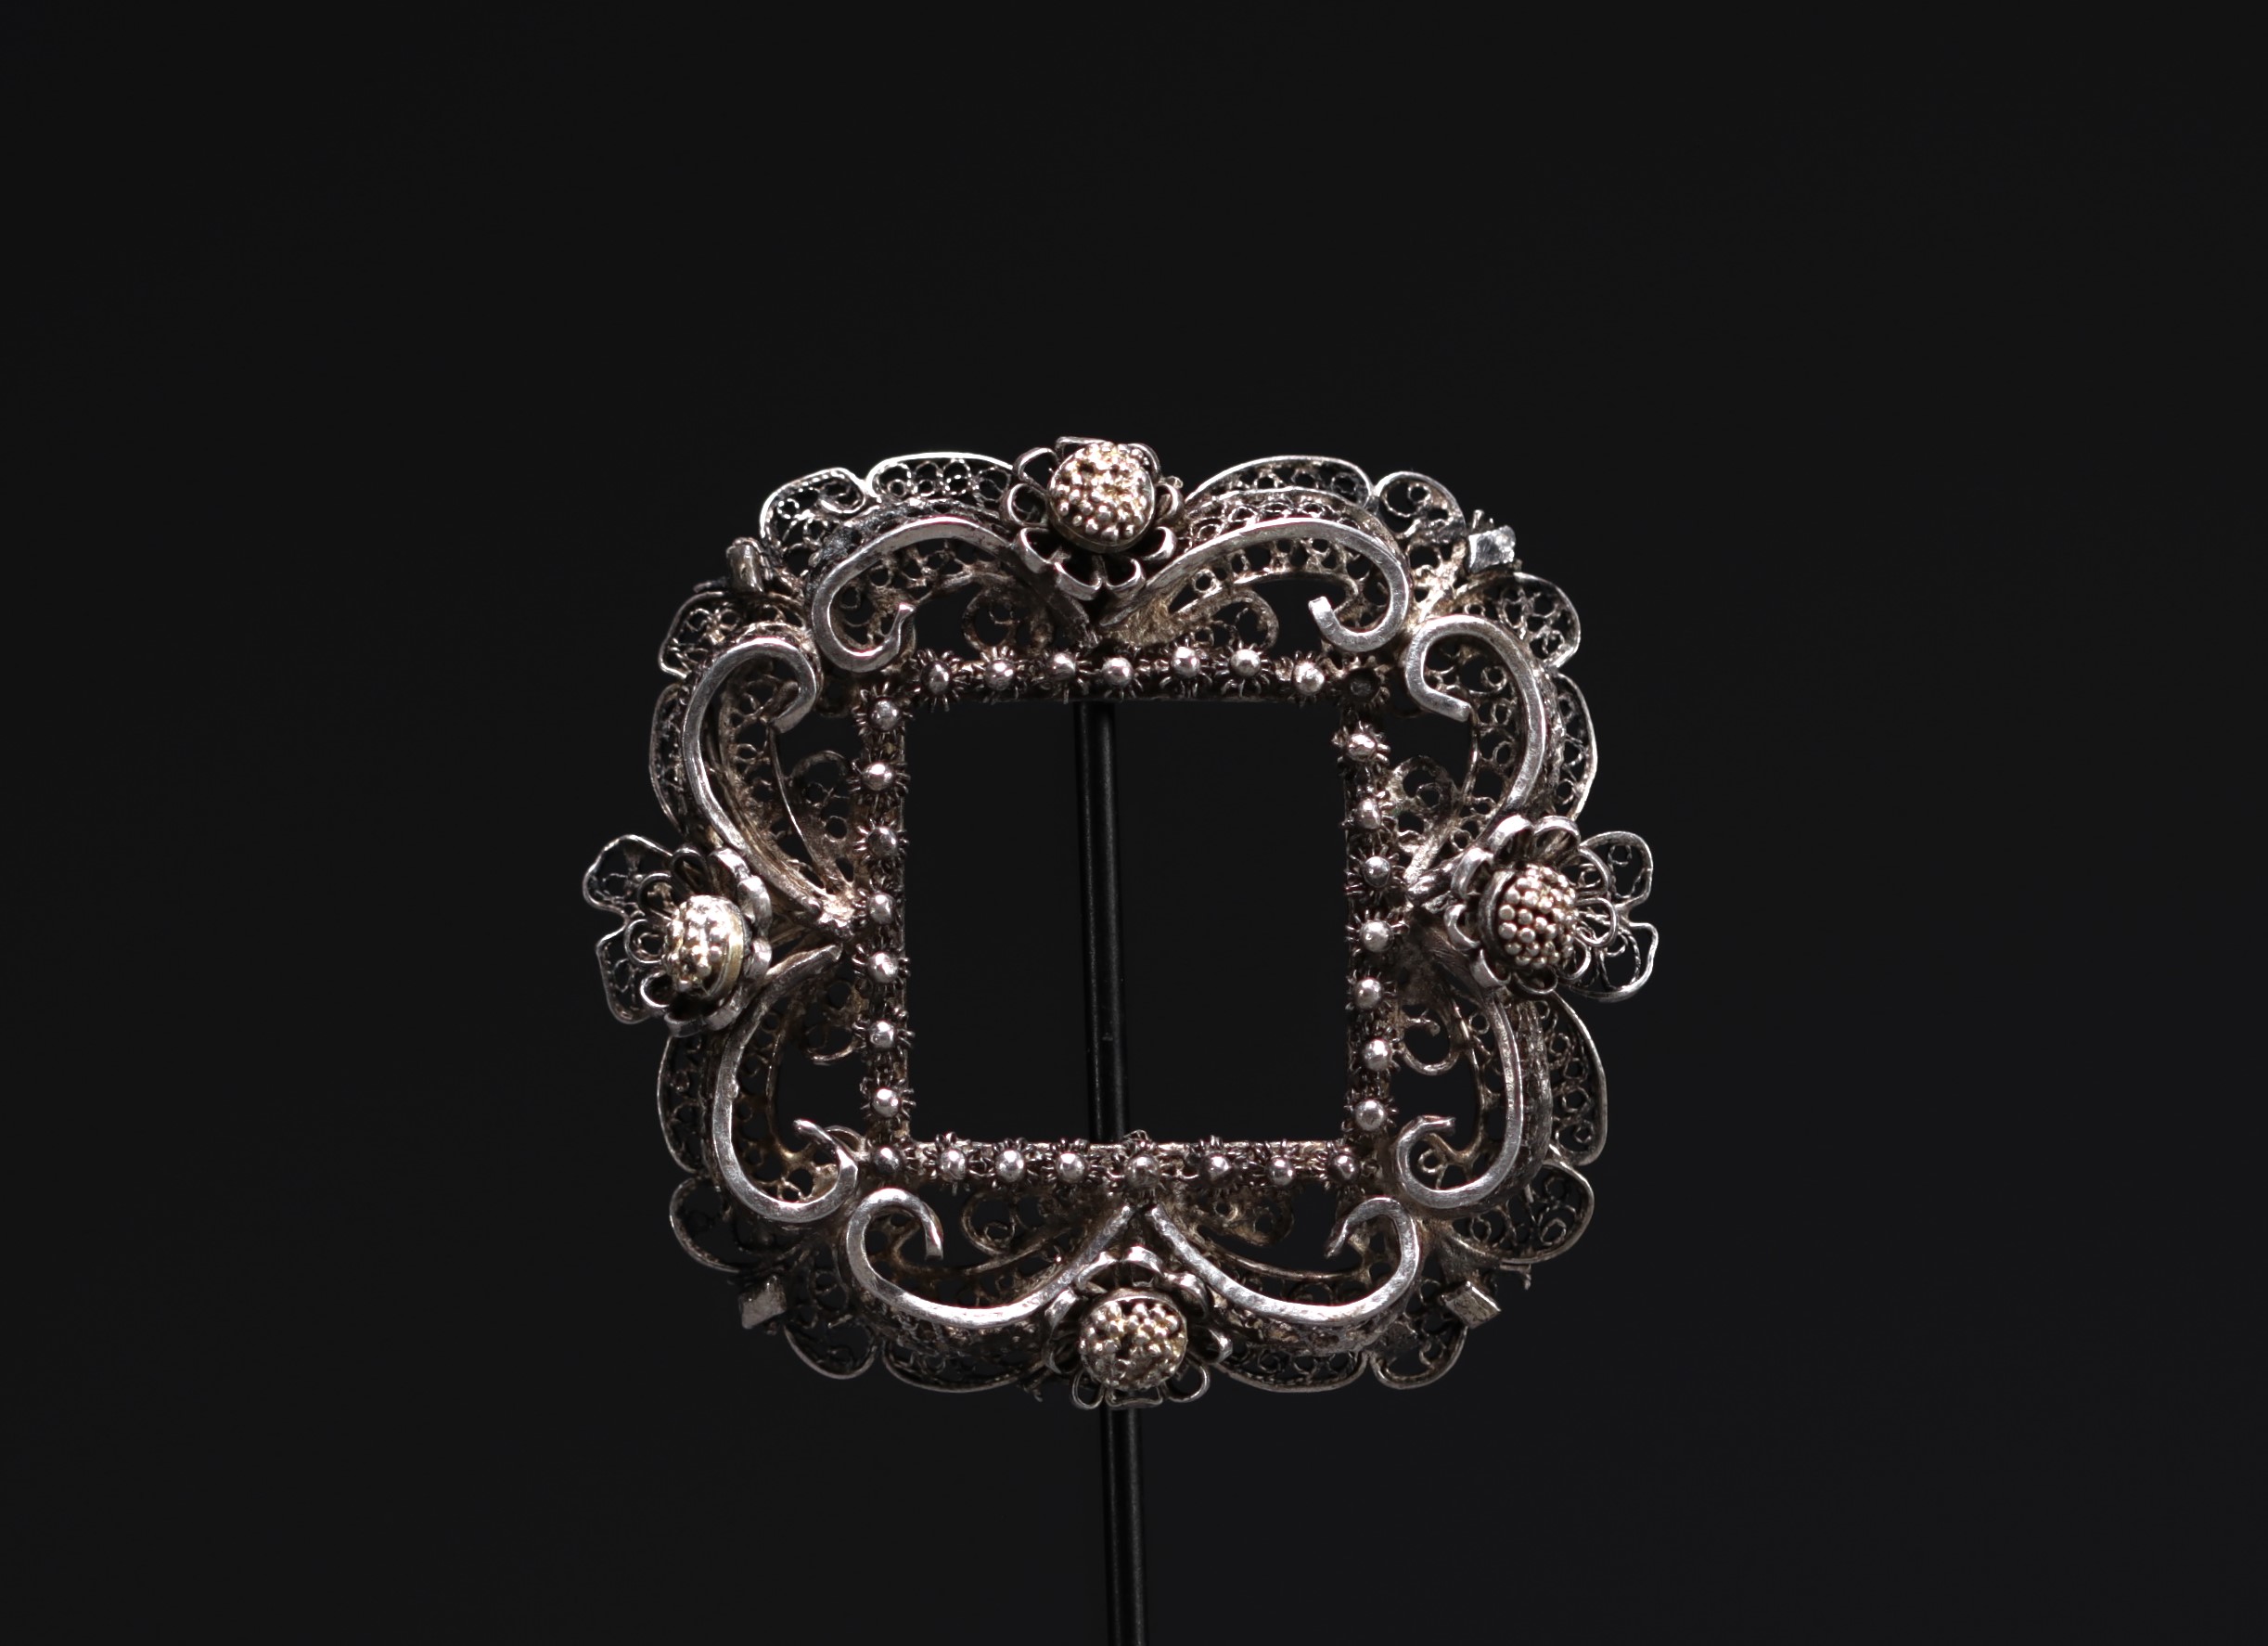 Set of two small filigree silver frames, Russia, 18th century. - Image 3 of 3